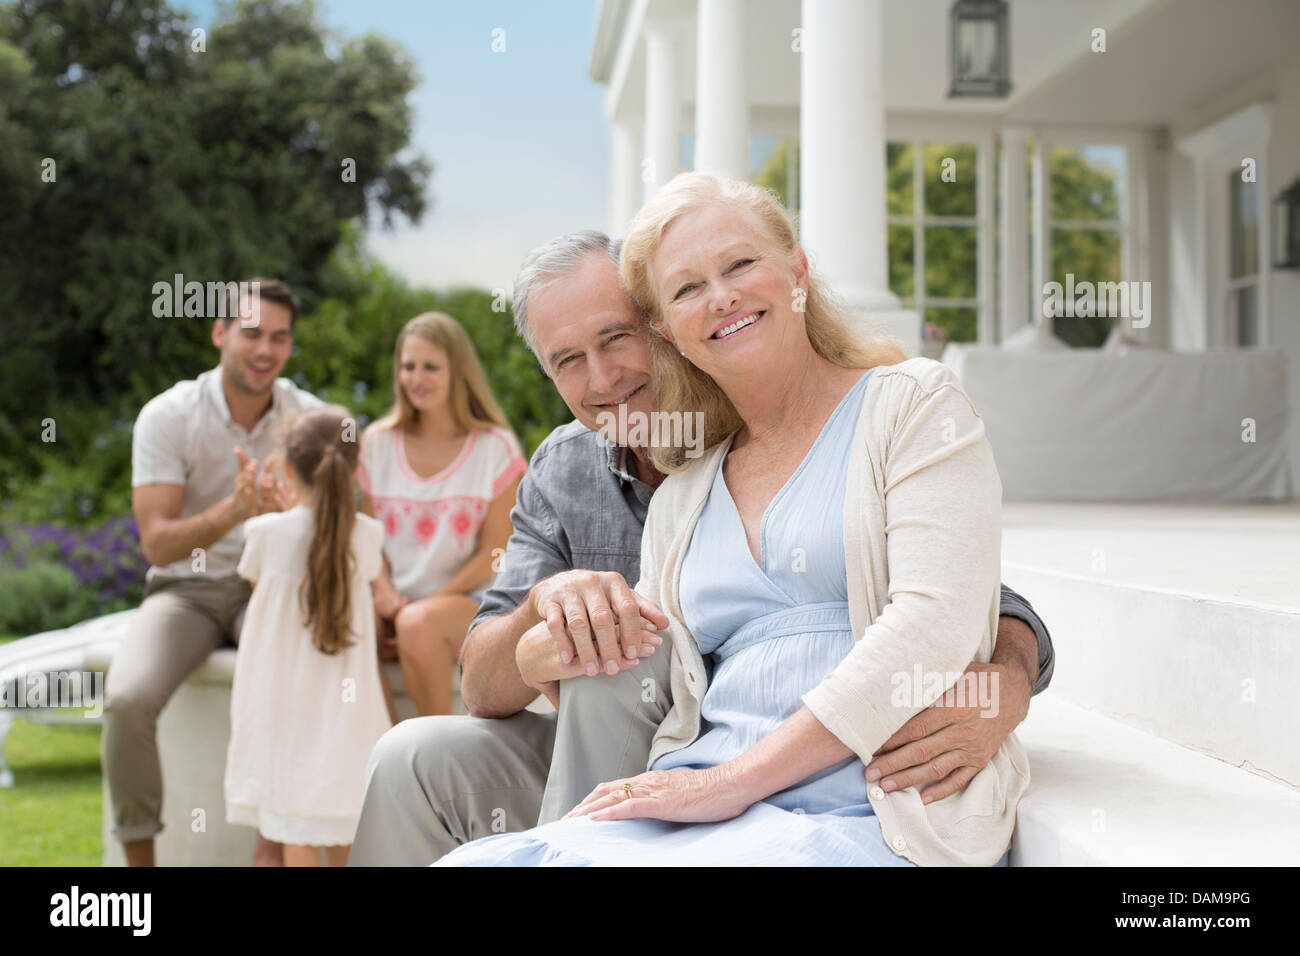 Older couple smiling on porch Stock Photo